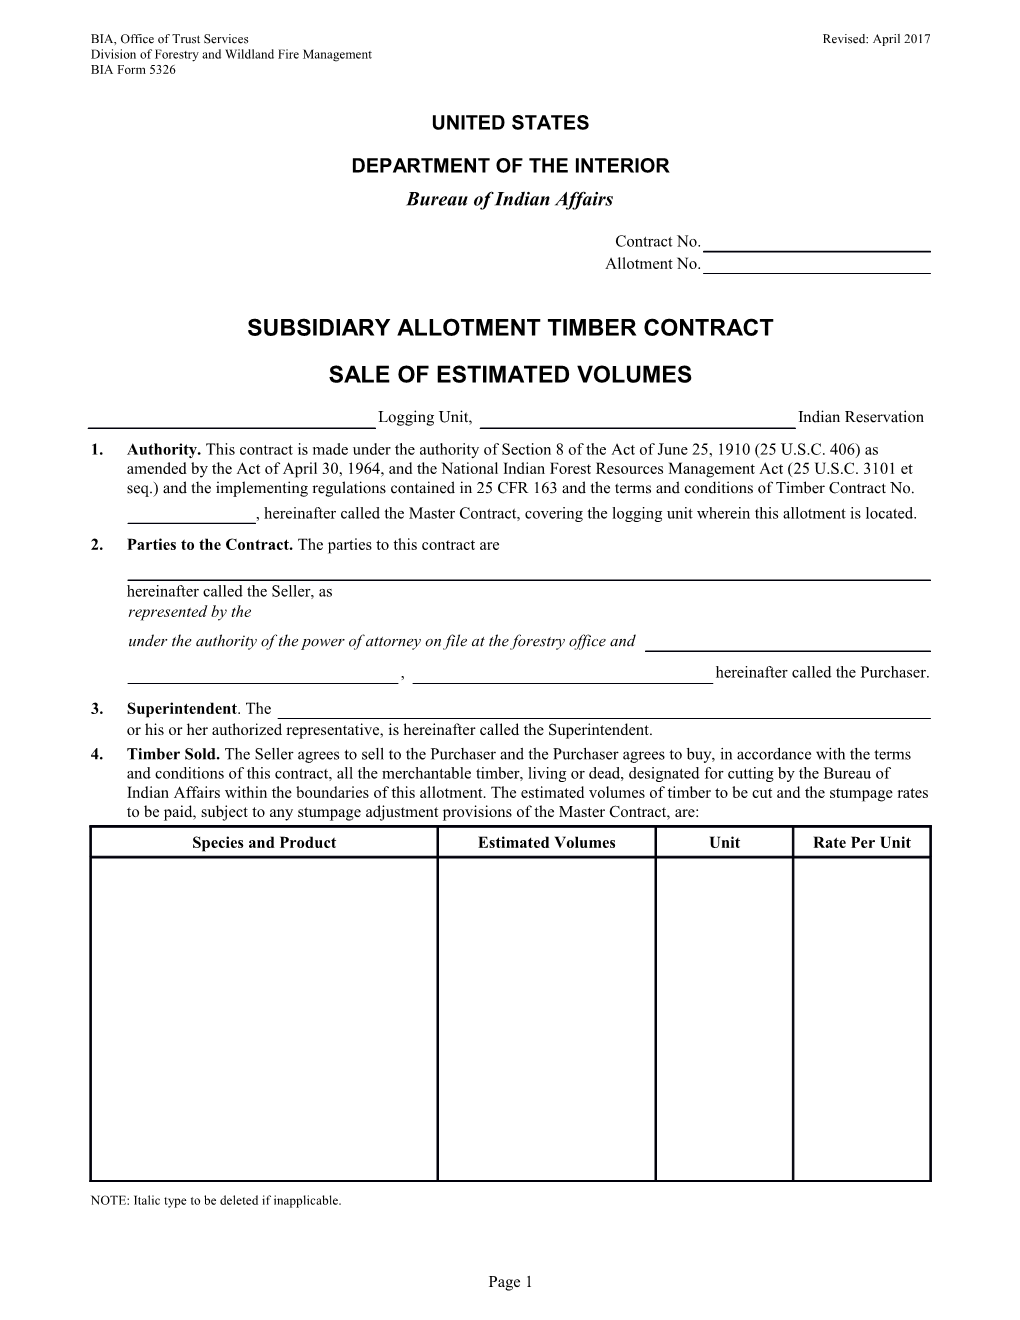 Subsidiary Allotment Timber Contract